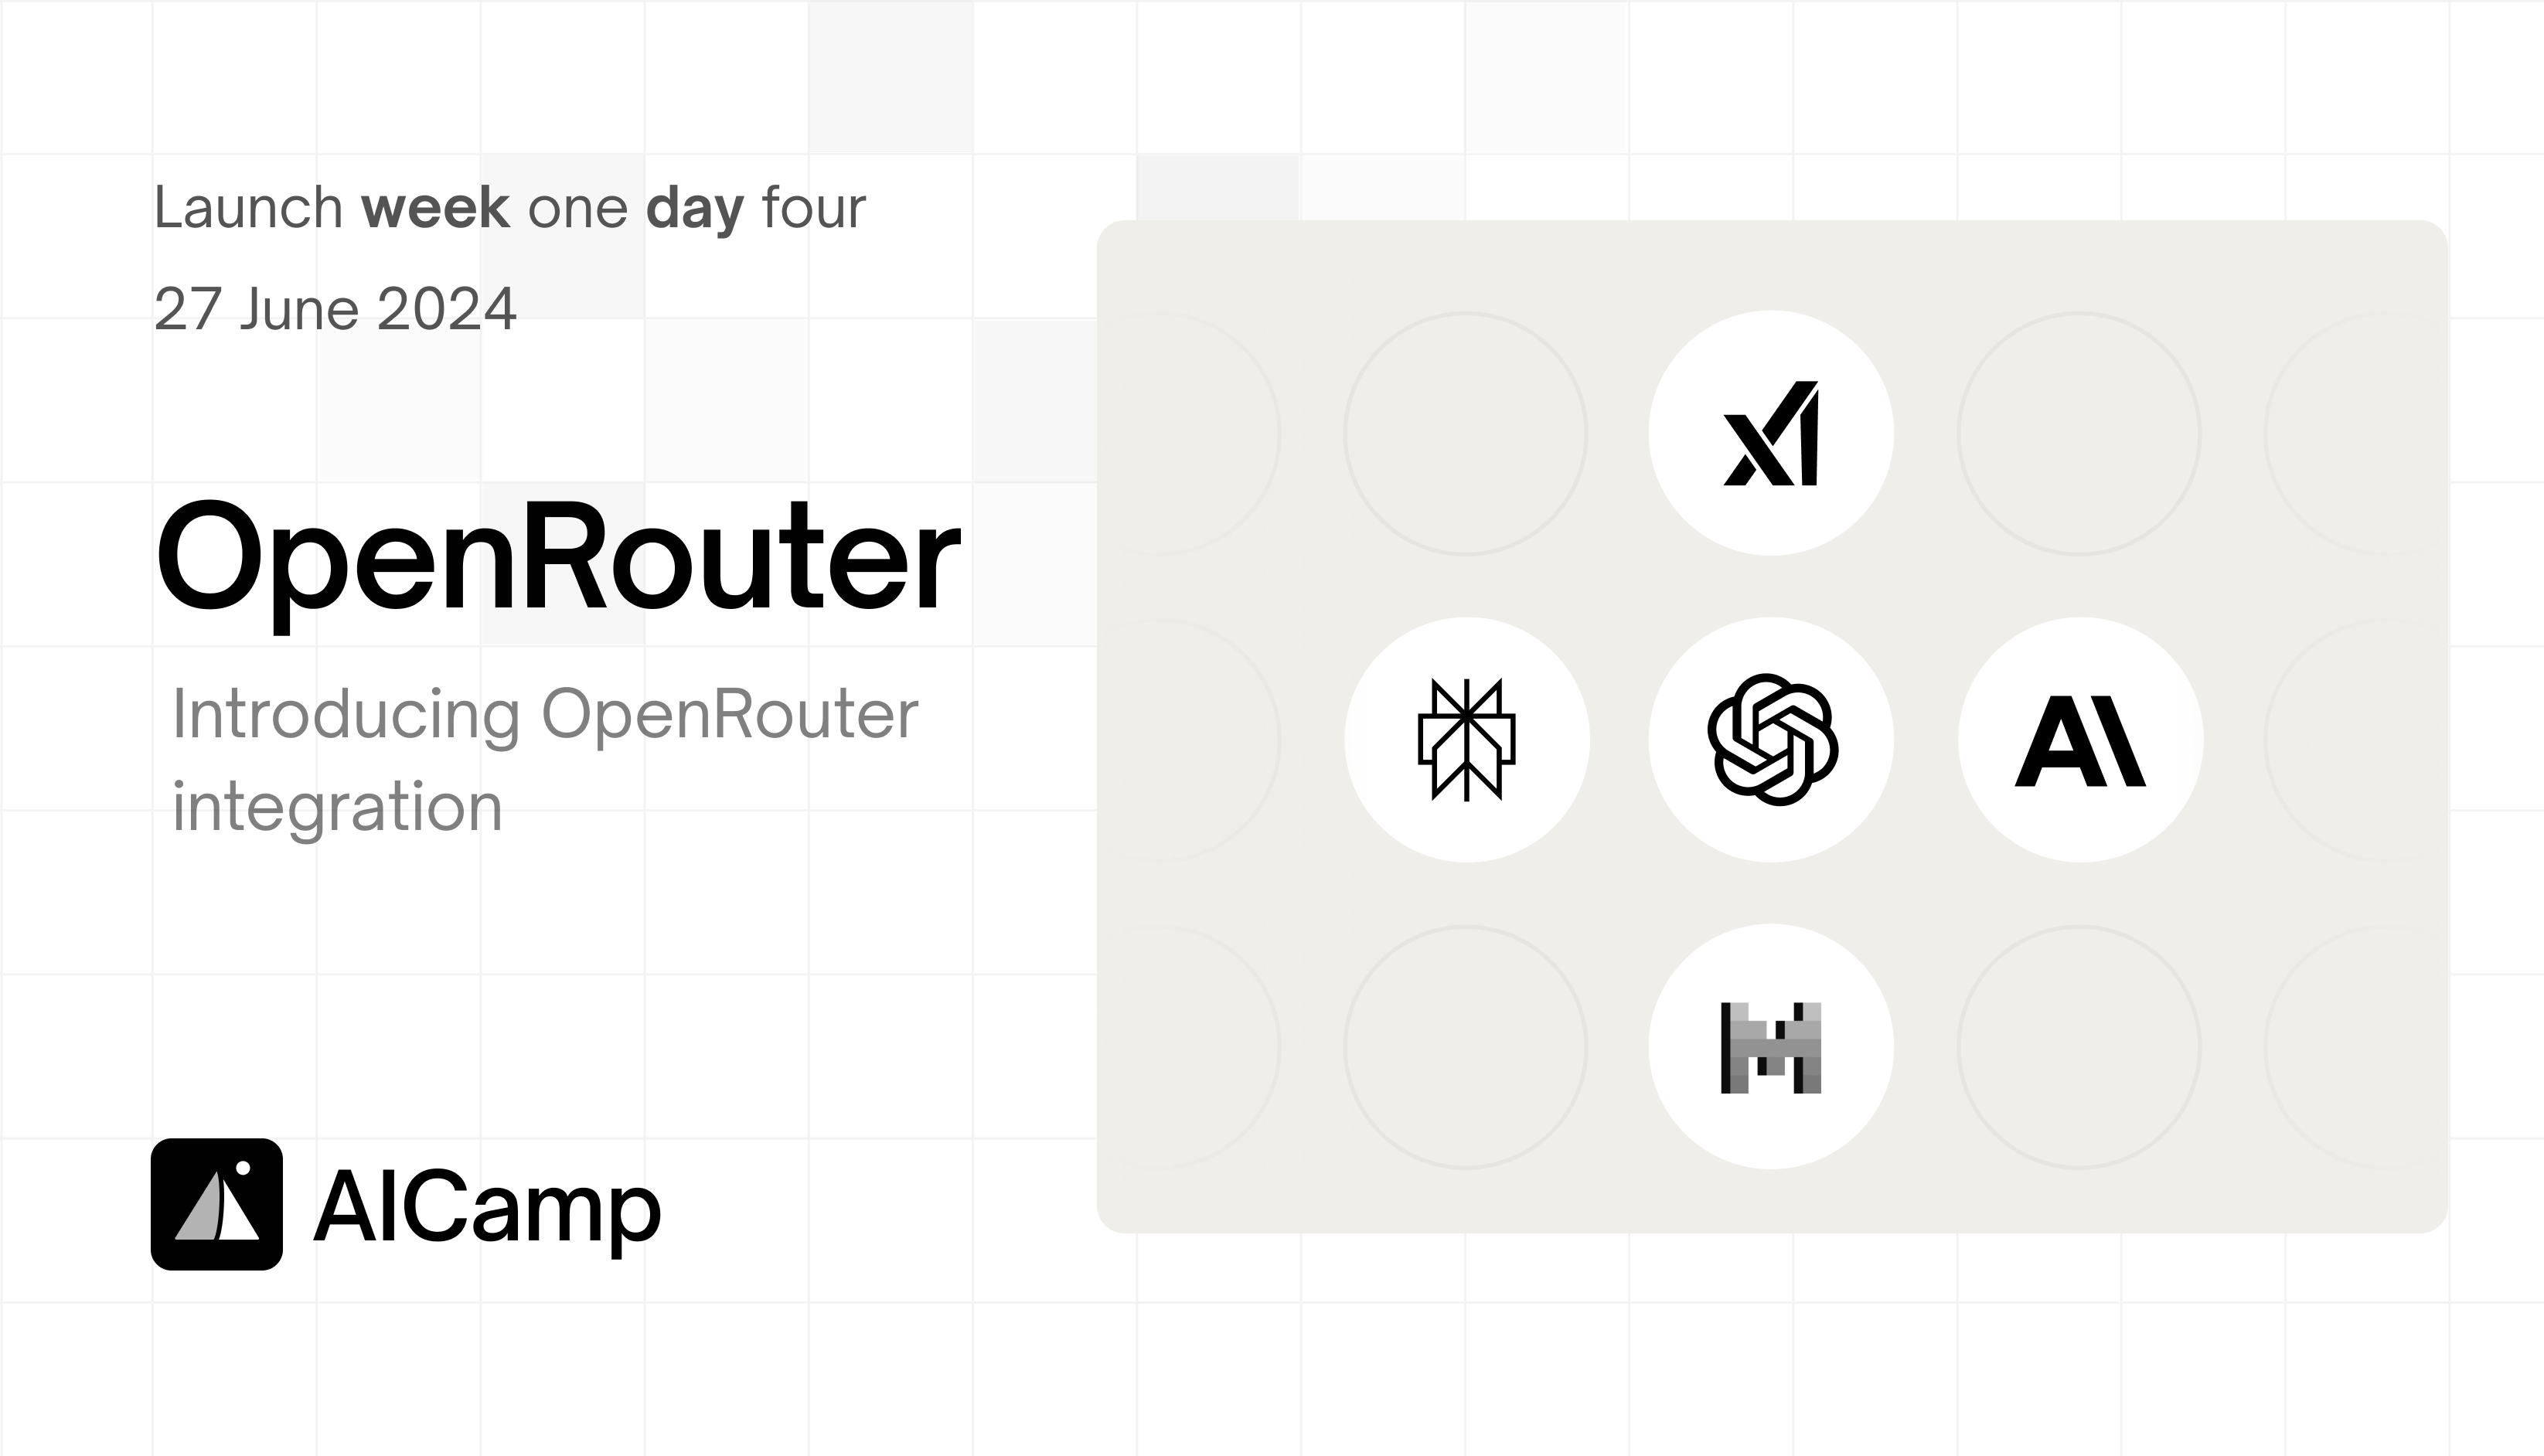 OpenRouter Integration Now Available in AICamp